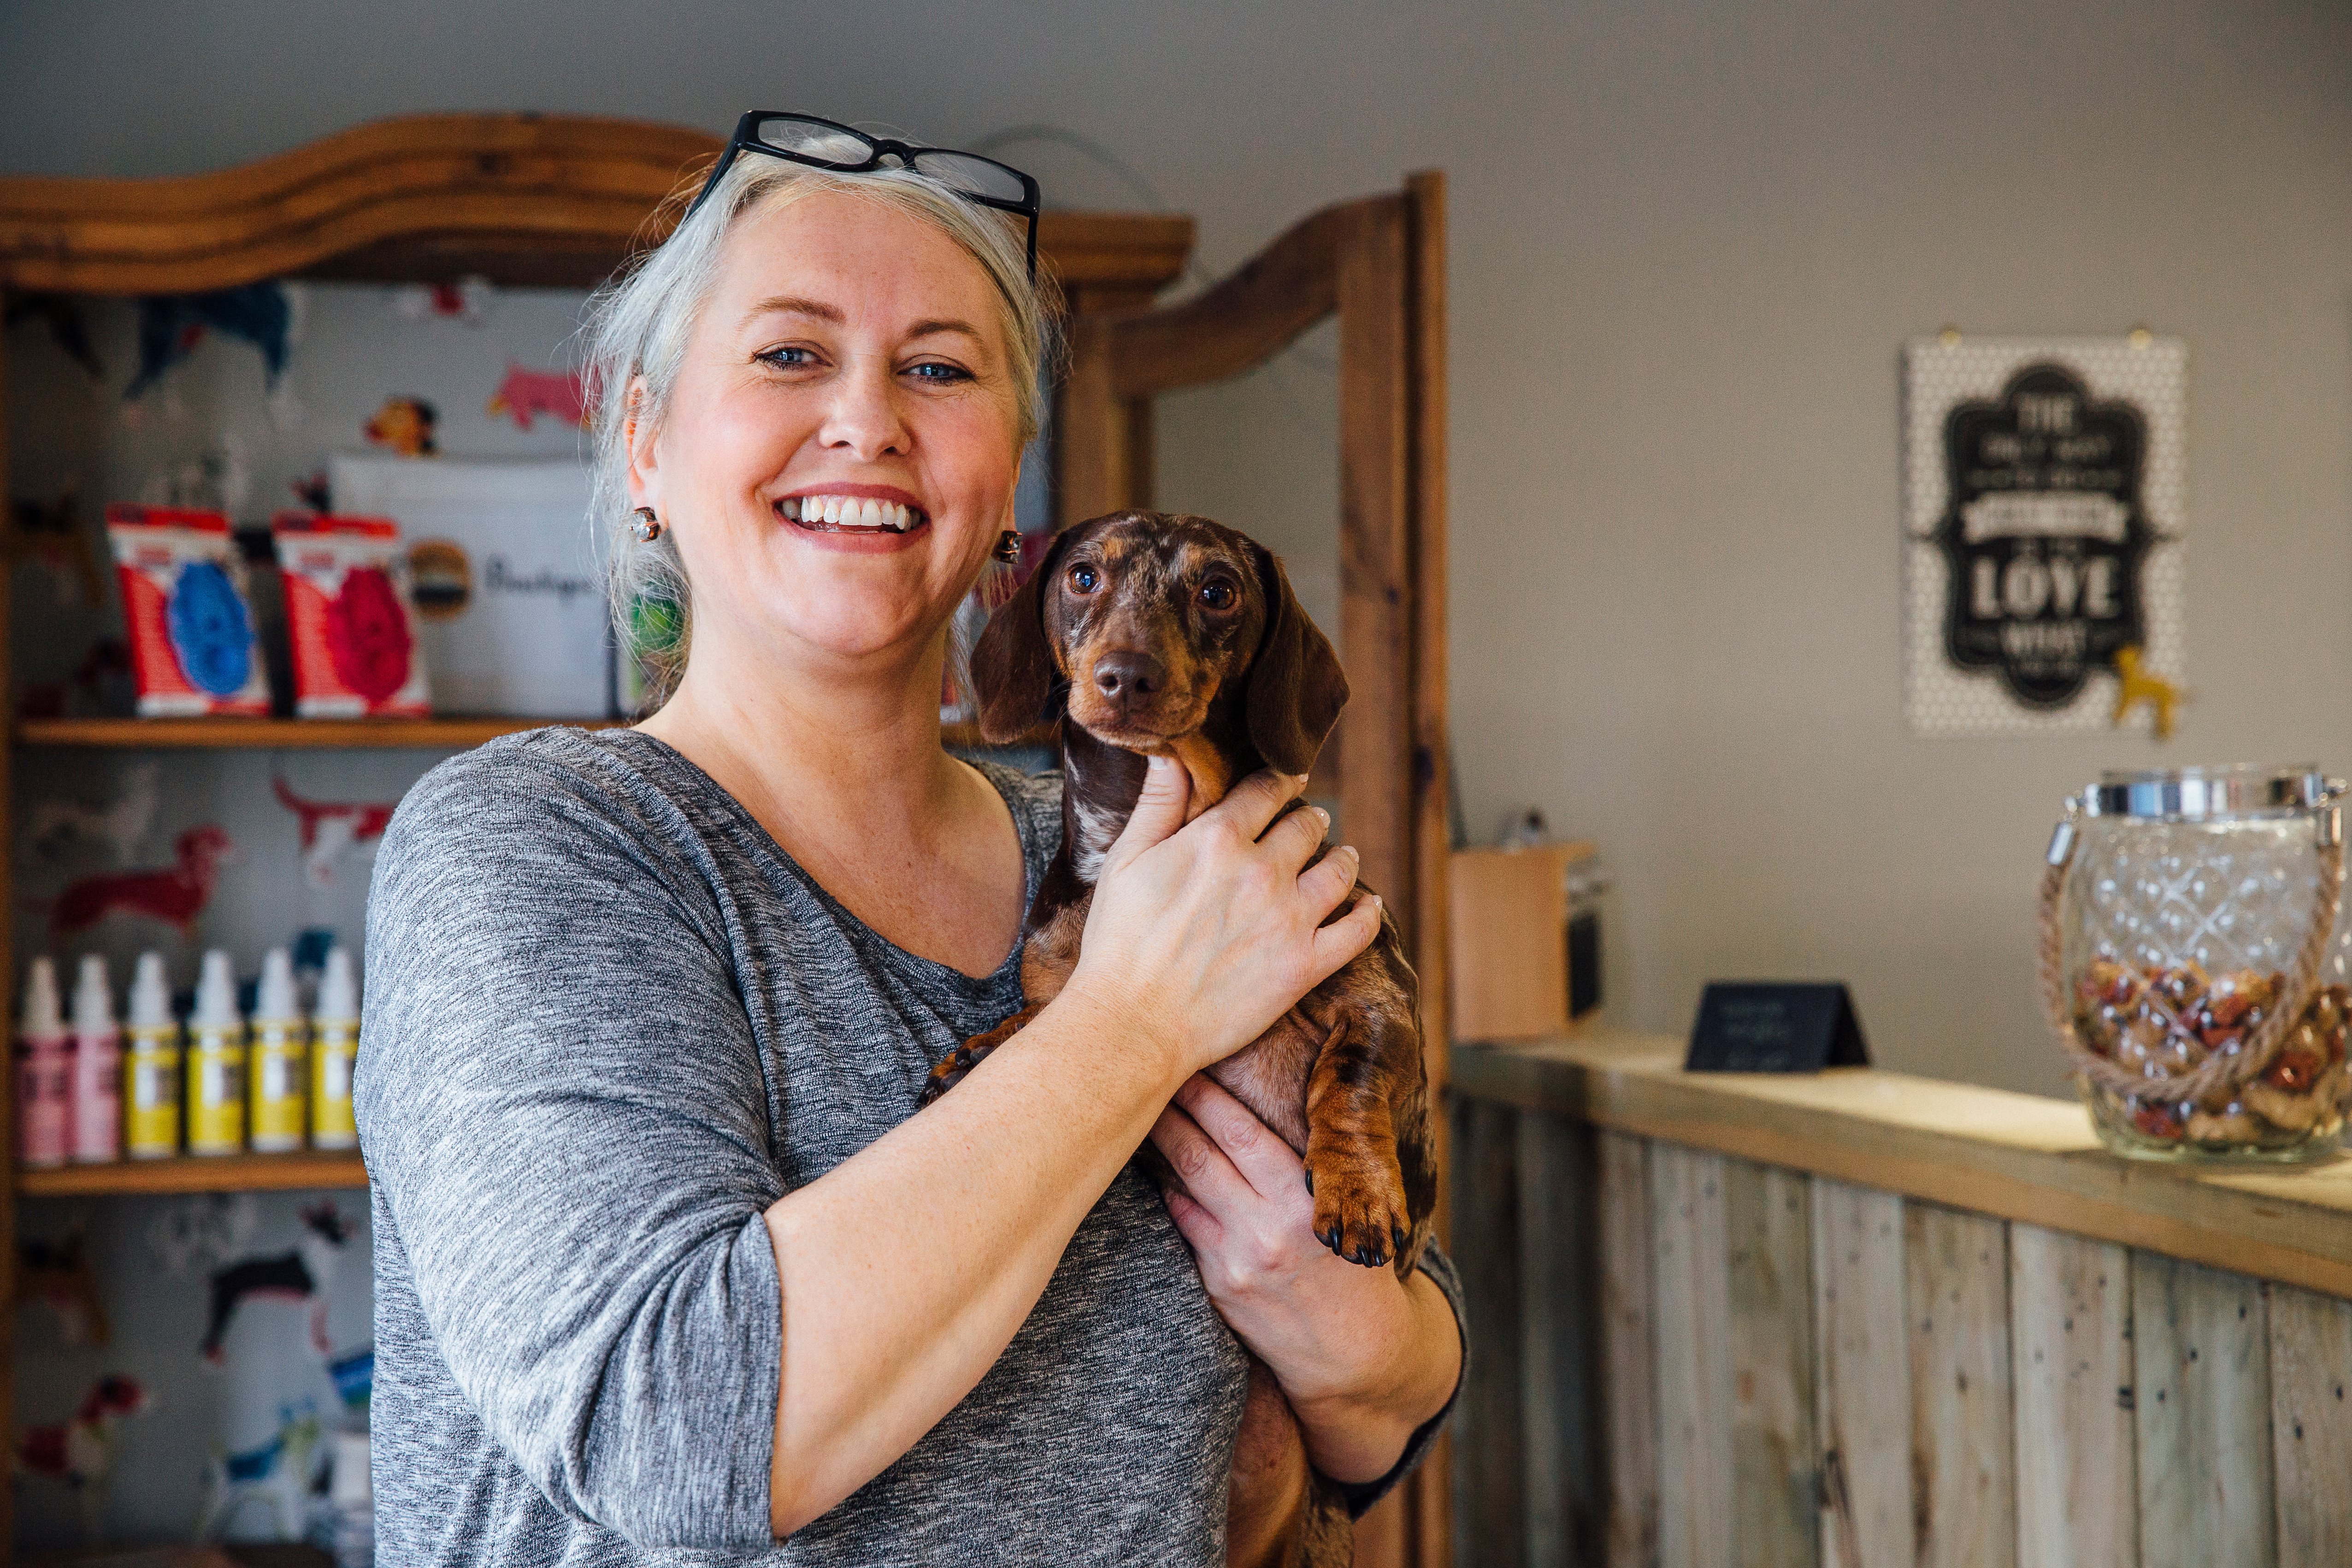 This image of a smiling woman holding a dog represents how investing in dog daycare software can help you keep your business fun. 